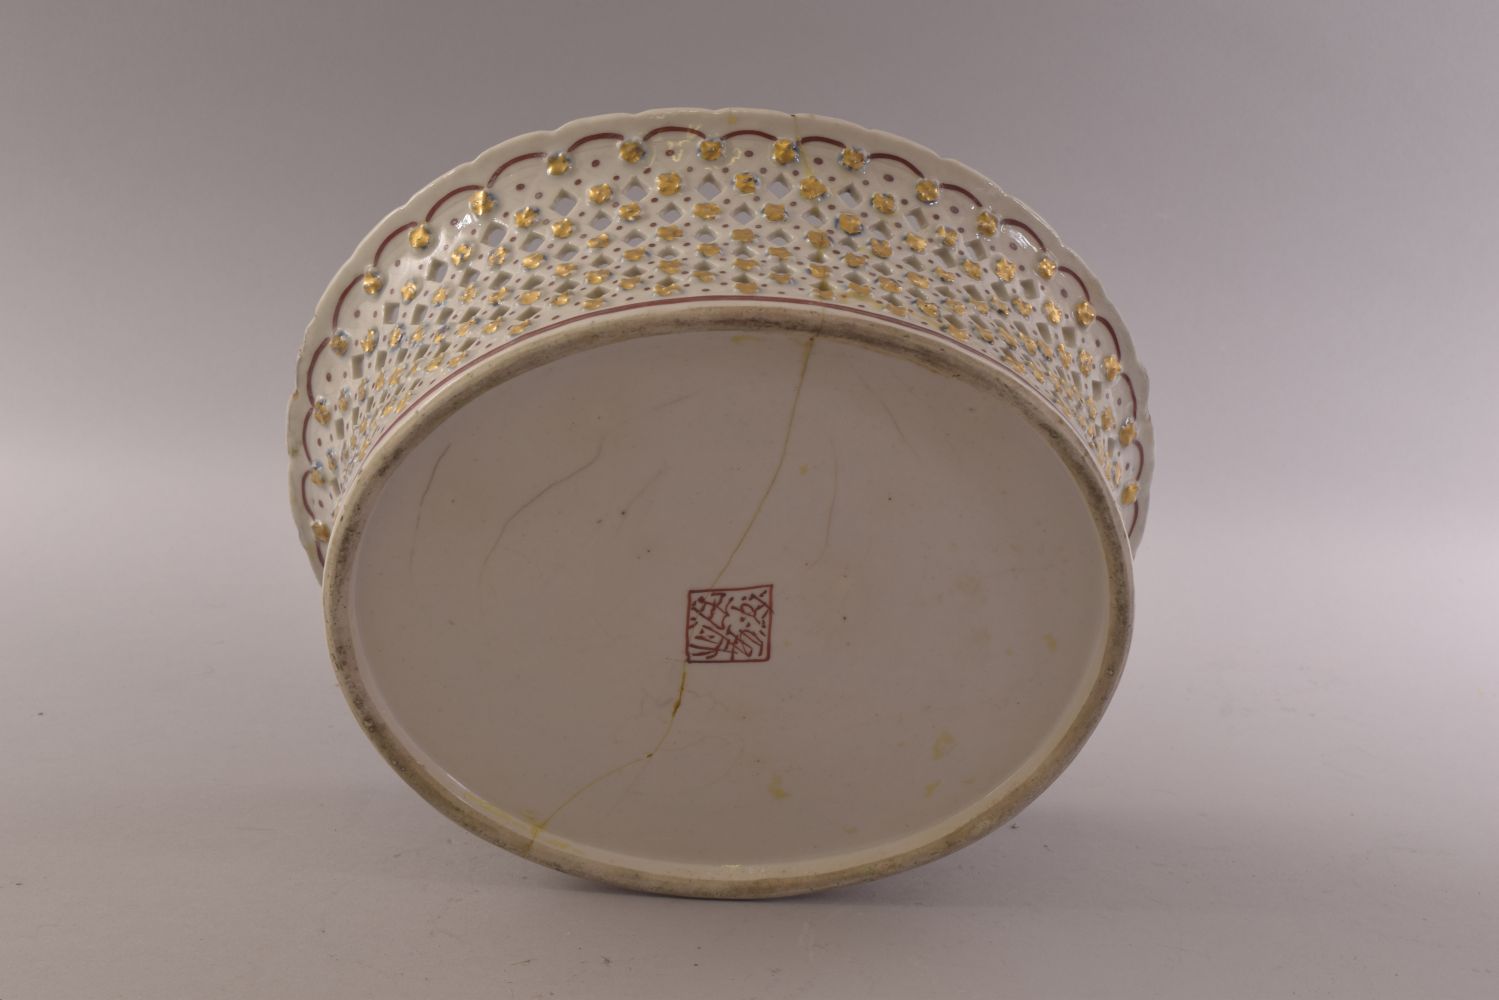 A 19TH CENTURY CHINESE OVAL PIERCED 'CLOBBERED' PORCELAIN BASKET, painted with a landscape, mark - Image 6 of 7